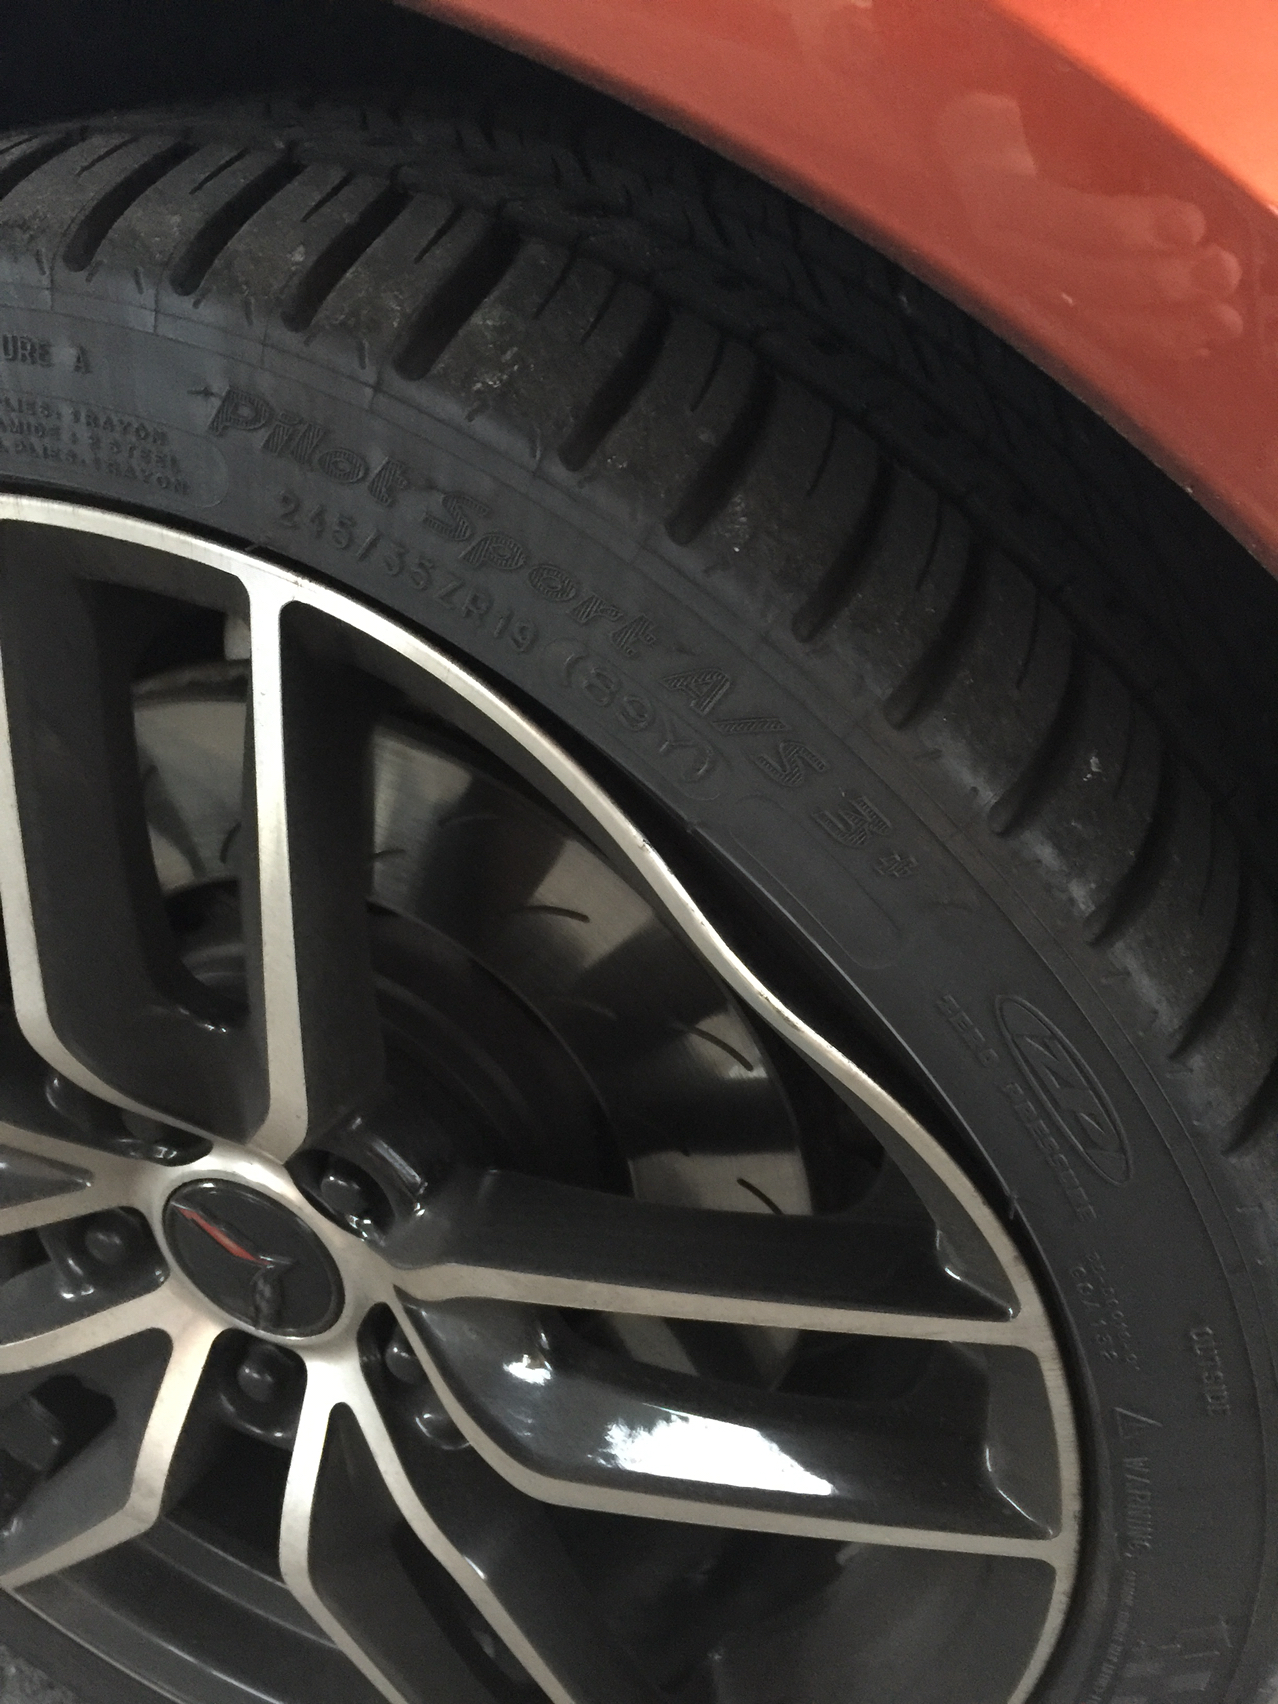 Knock-Off Wheels and Repairs: Are They Ever a Good Combo?